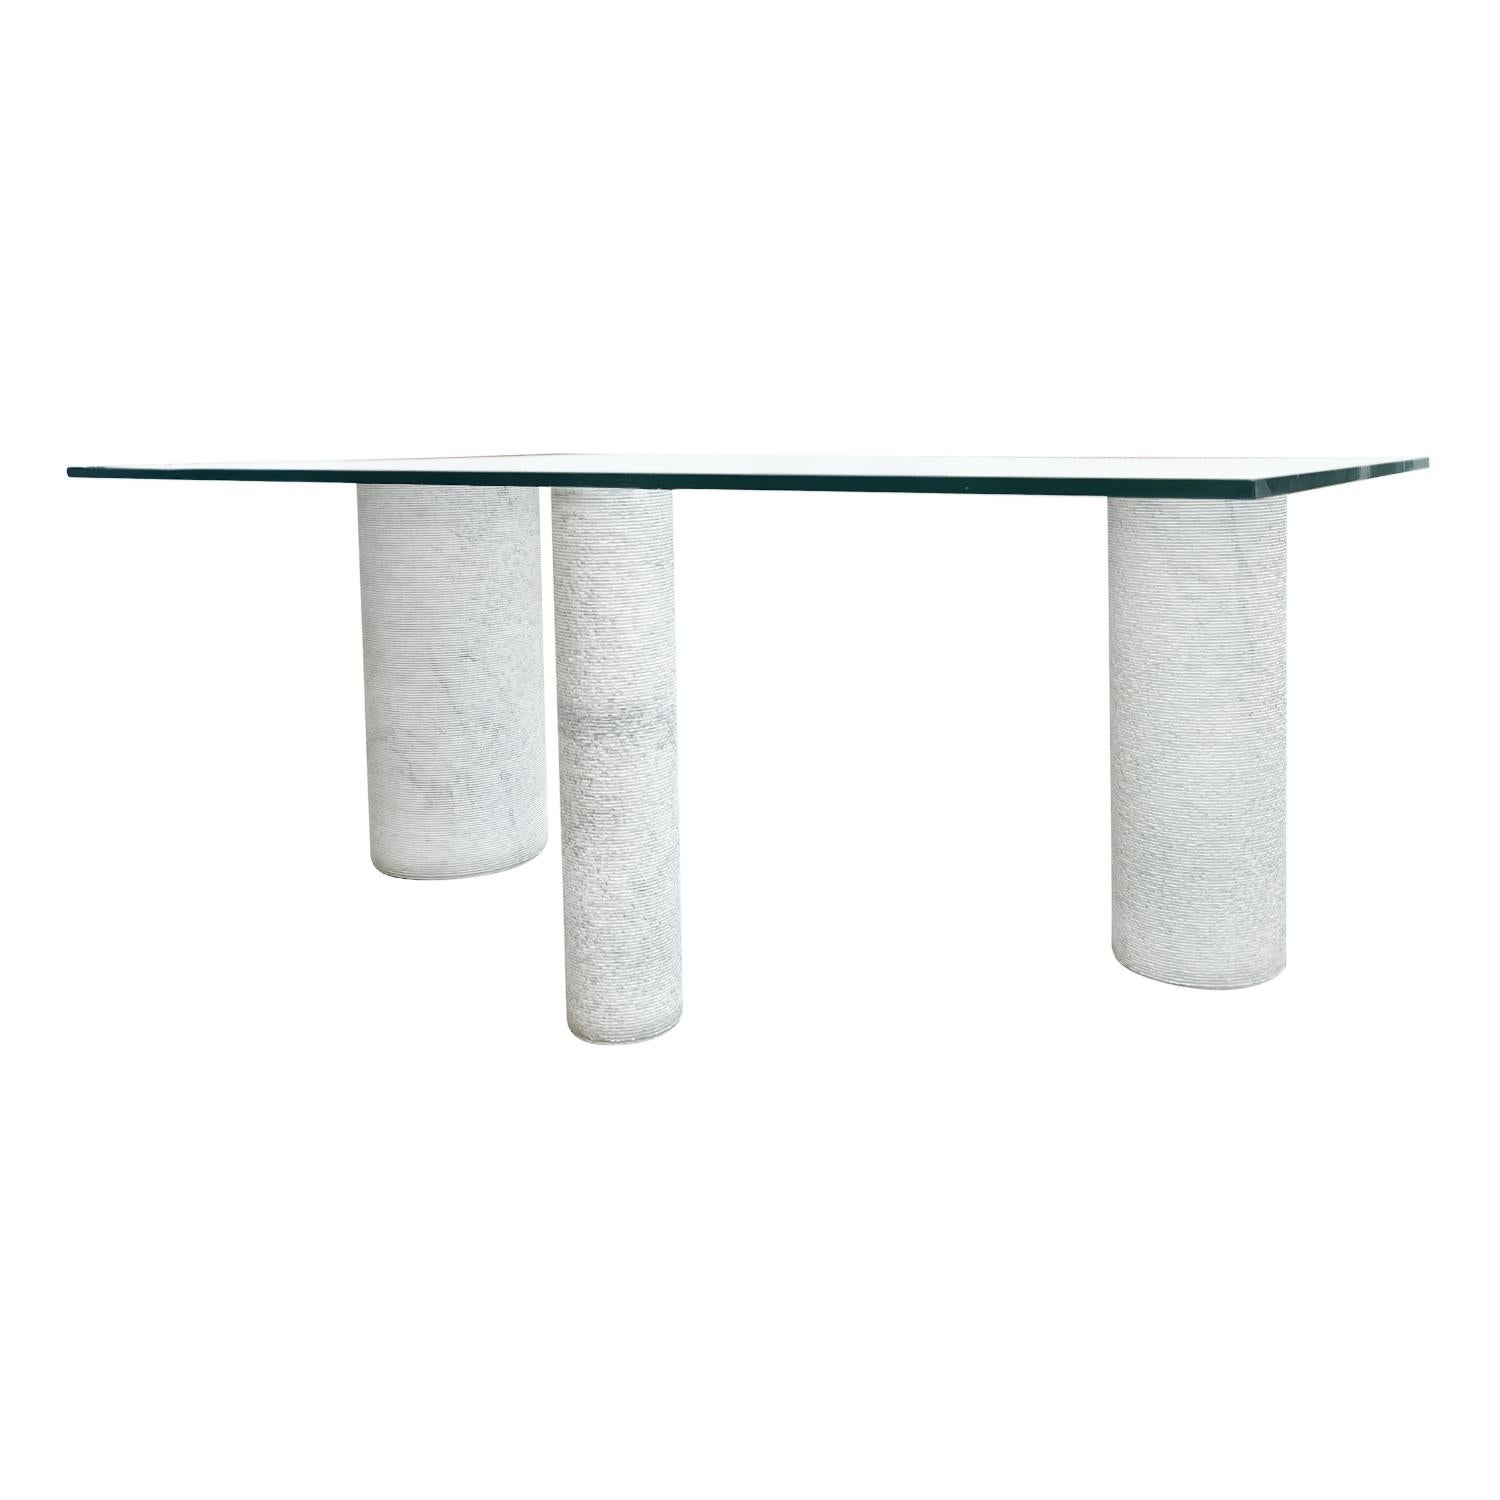 20th Century White Italian Marble, Glass Dining Room Table by Massimo Vignelli For Sale 1